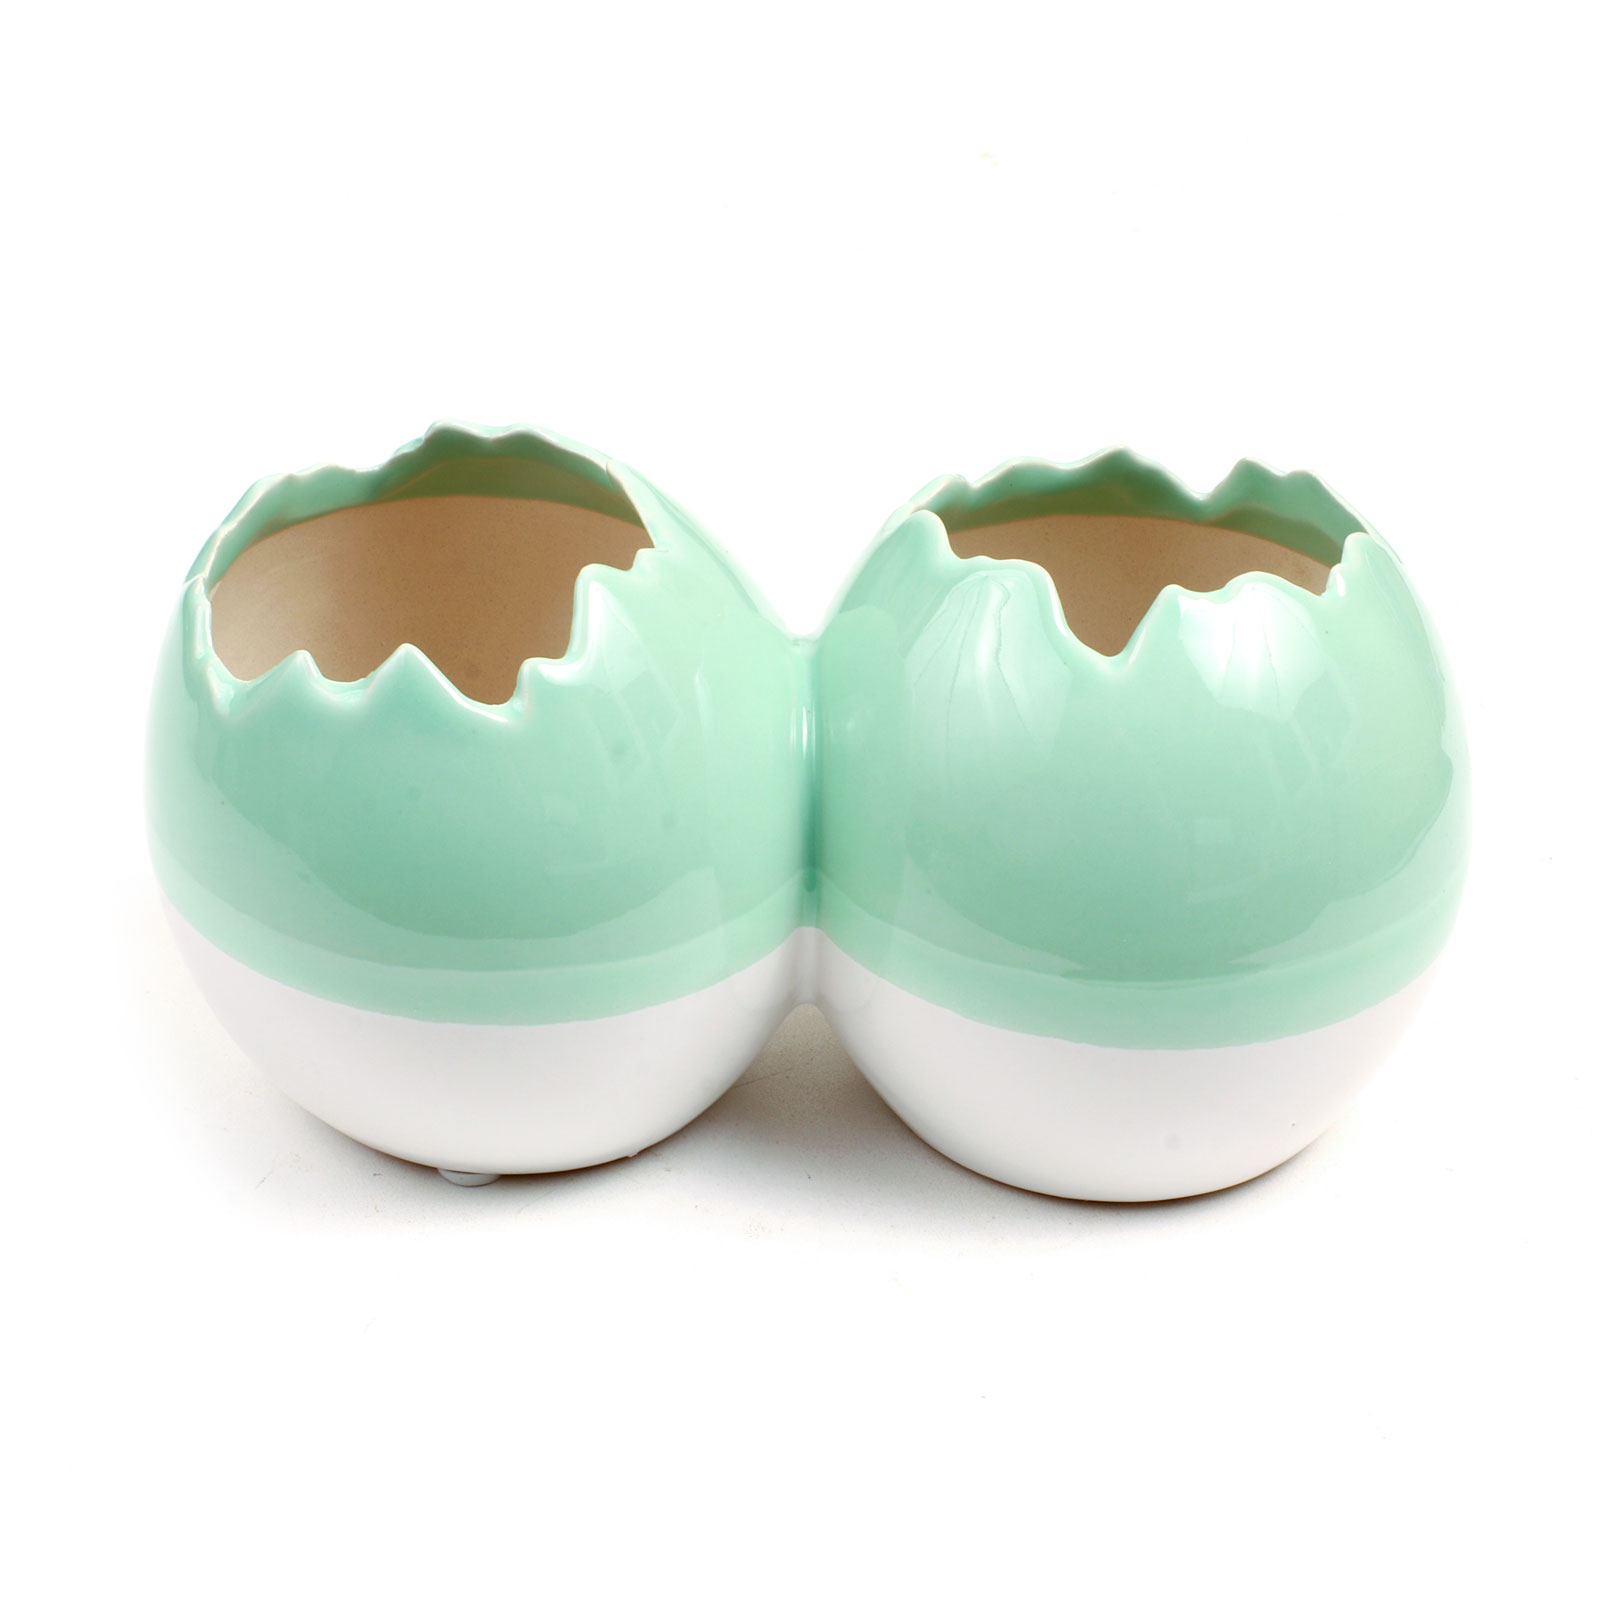 Duo Egg Pot 5.0" x 9.0" Questions & Answers